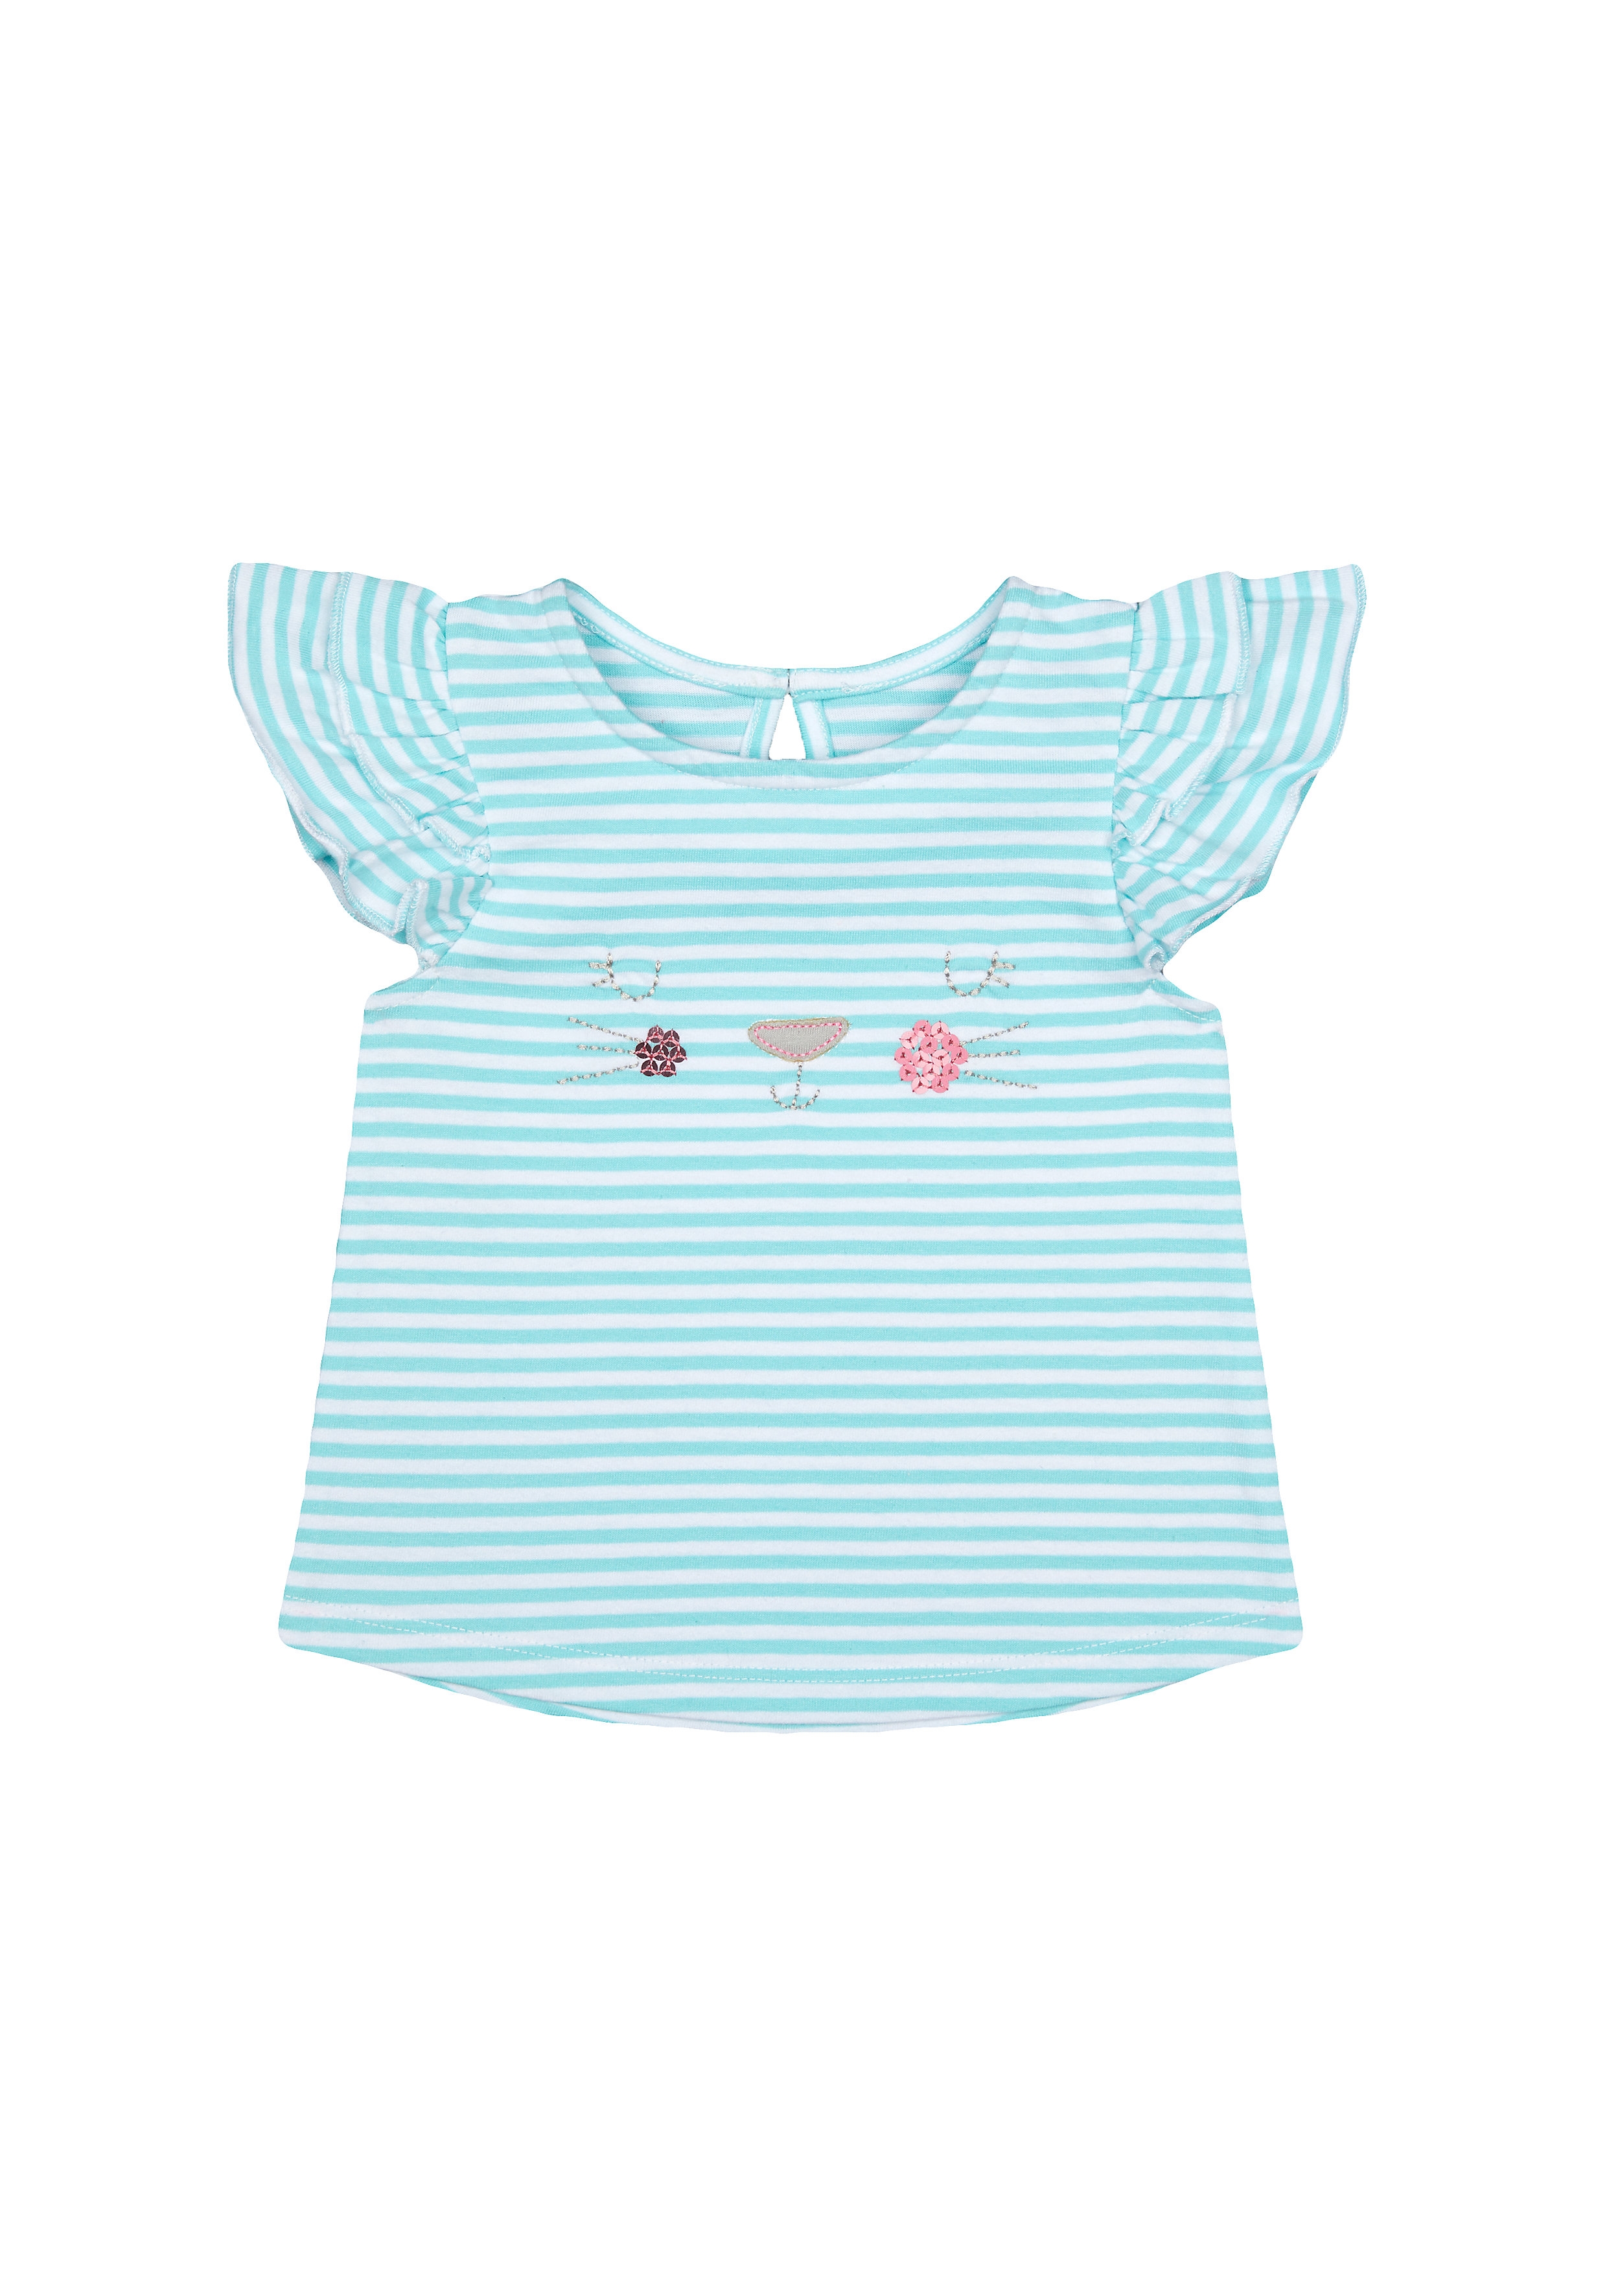 Mothercare | Girls Half Sleeves Round Neck T-shirts  - Blue